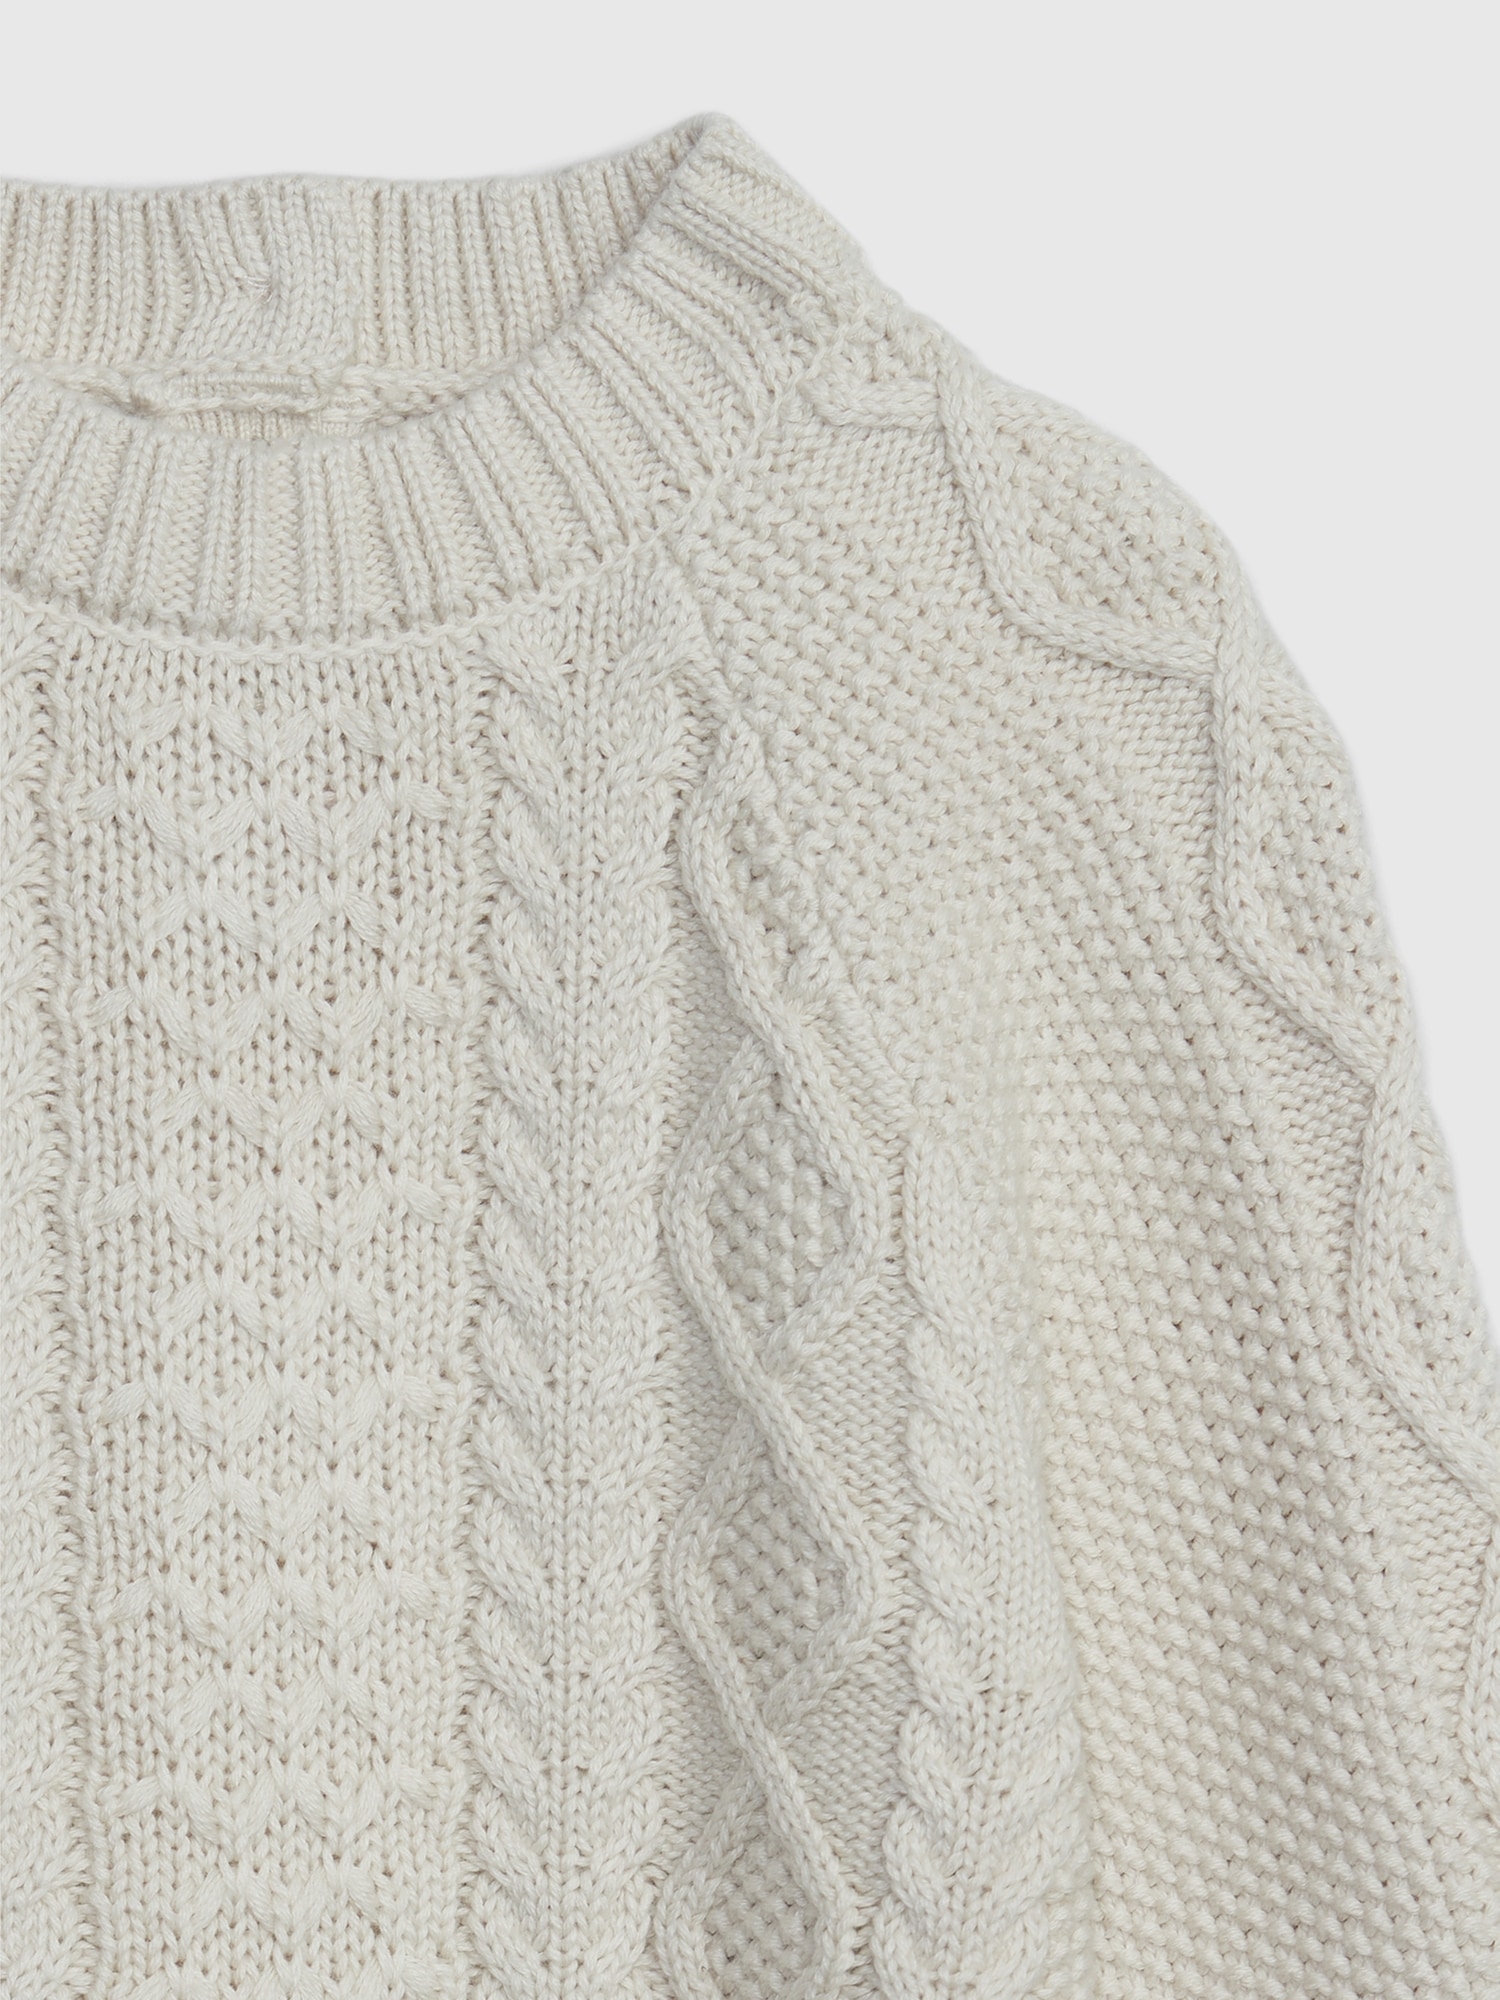 Baby Cable-Knit Sweater Dress | Gap